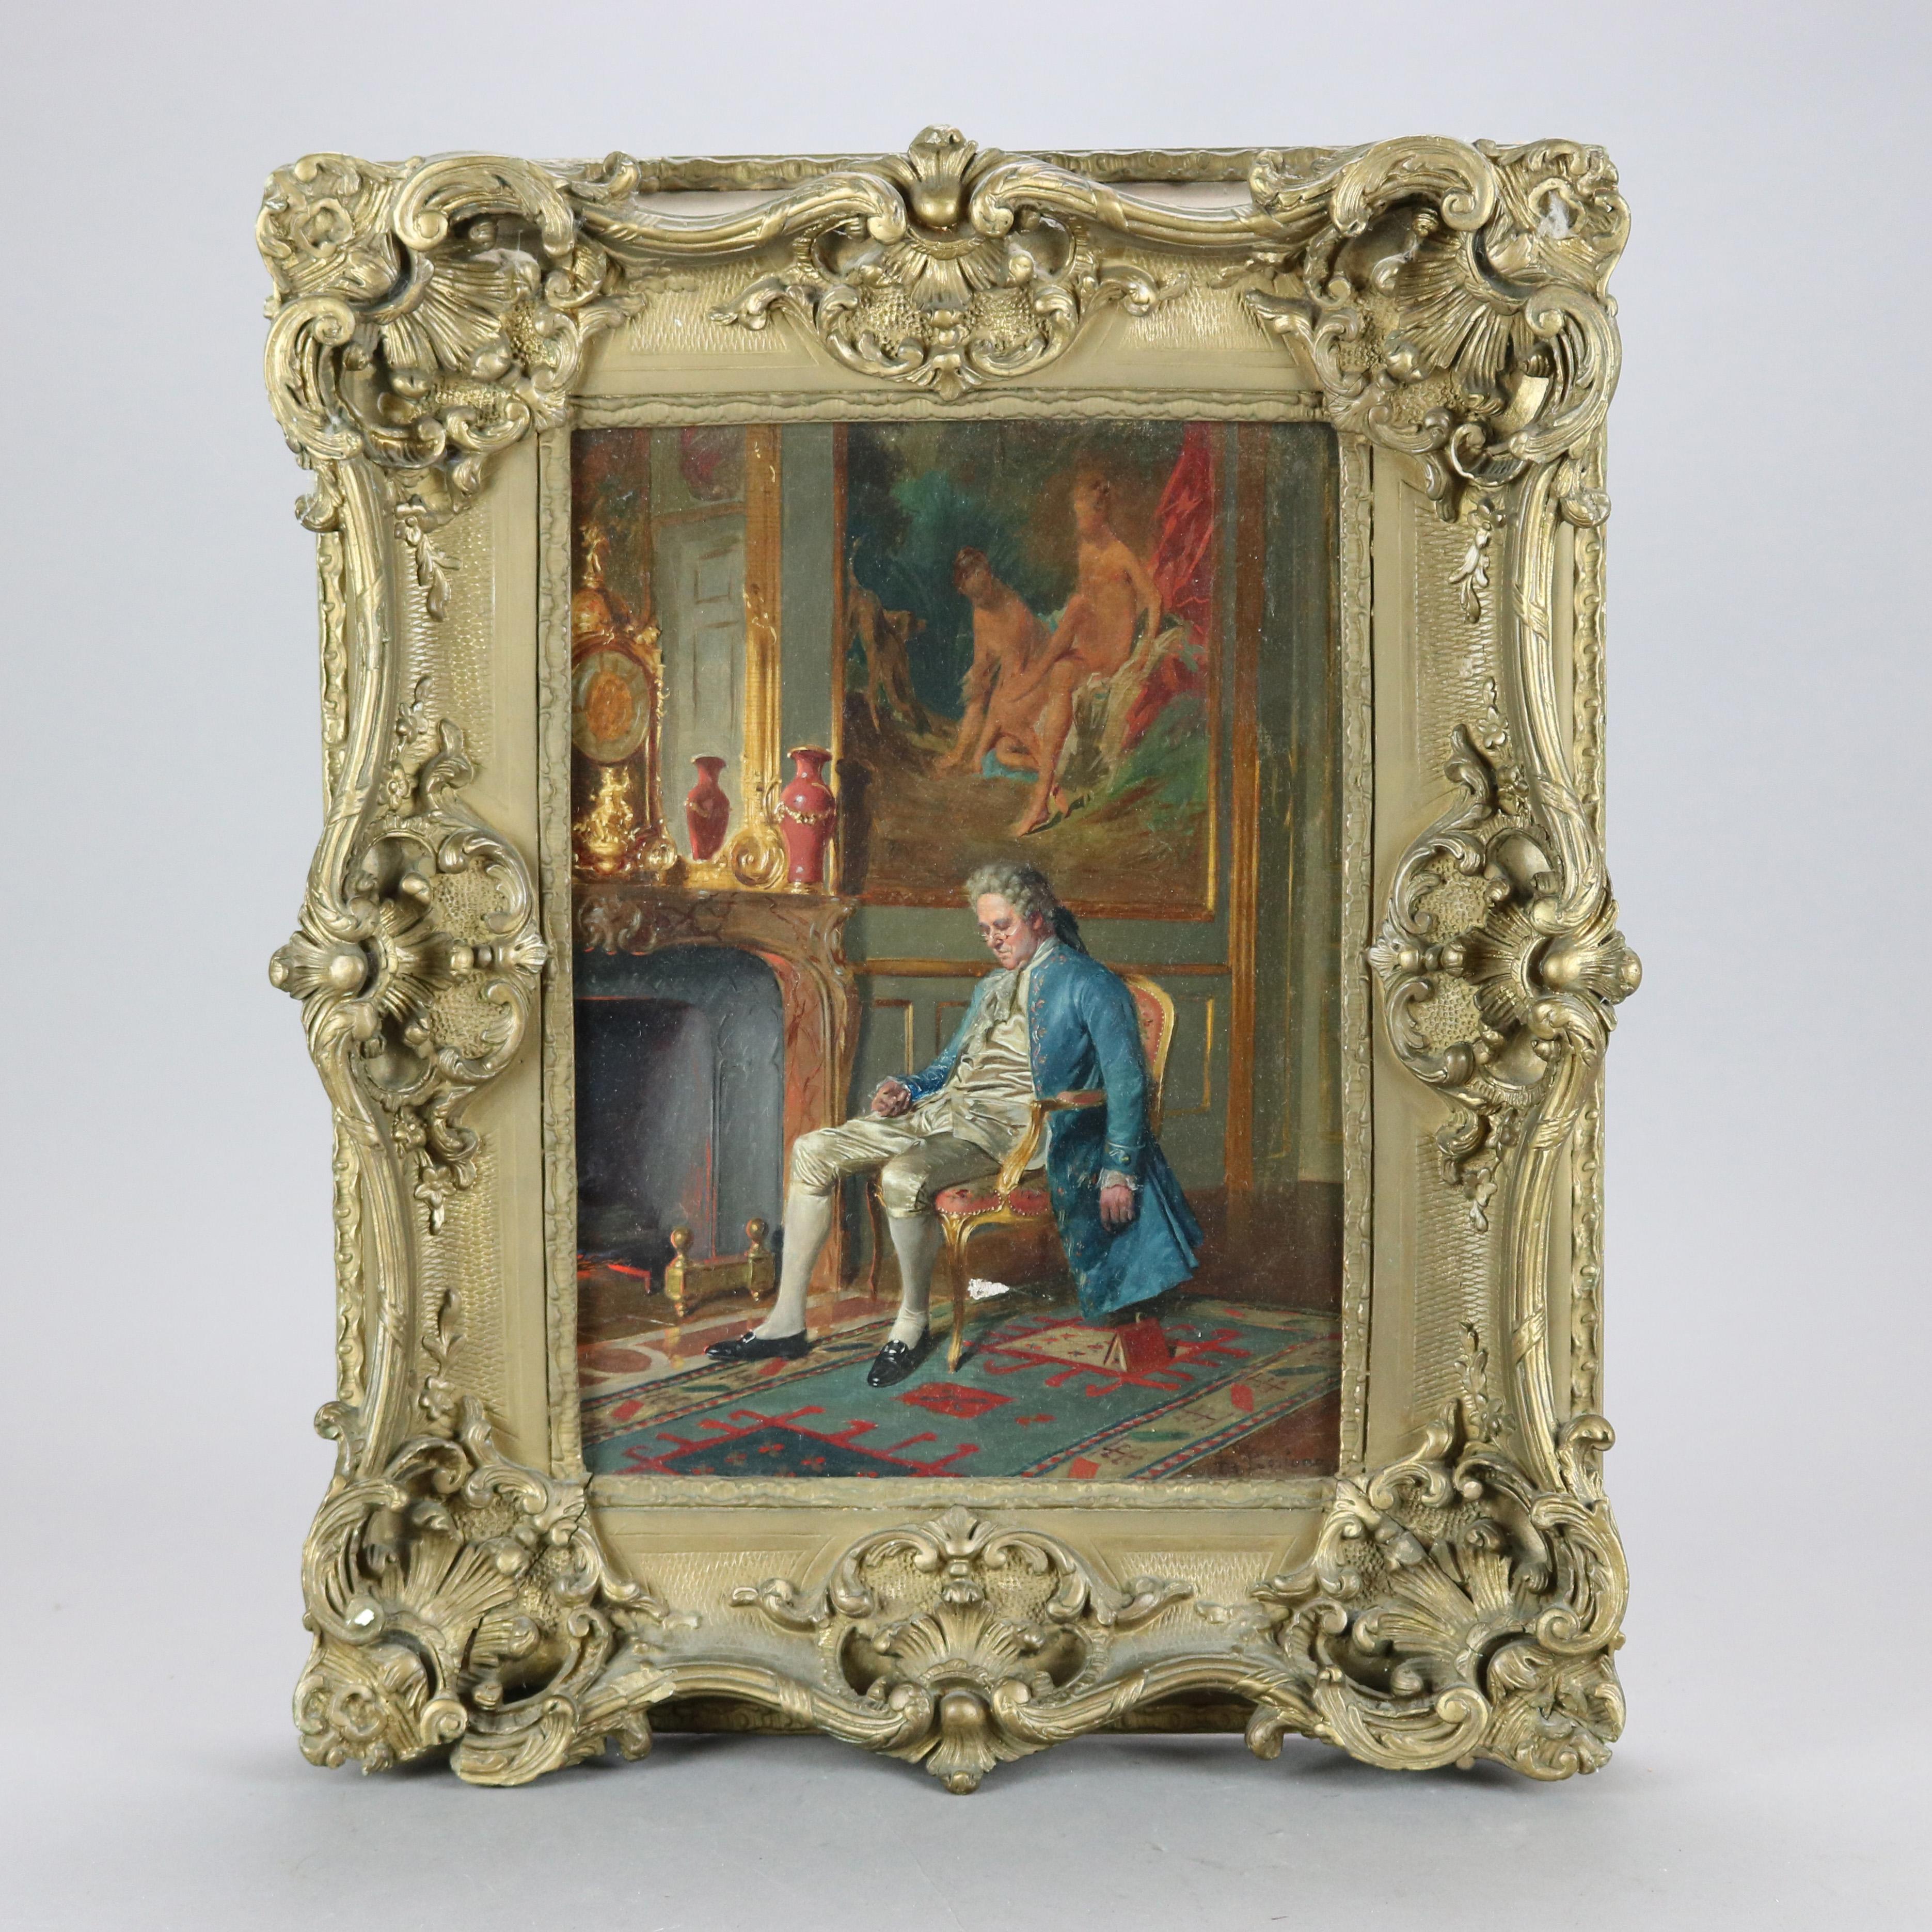 An antique painting by Bernard Louis Borione offers oil on wood board genre scene of gentleman in parlor setting, artist signed lower right, seated in giltwood frame, c1870

Measures - 19''h x 14.75''w x 2.75''d

Additional Information:
Bernard